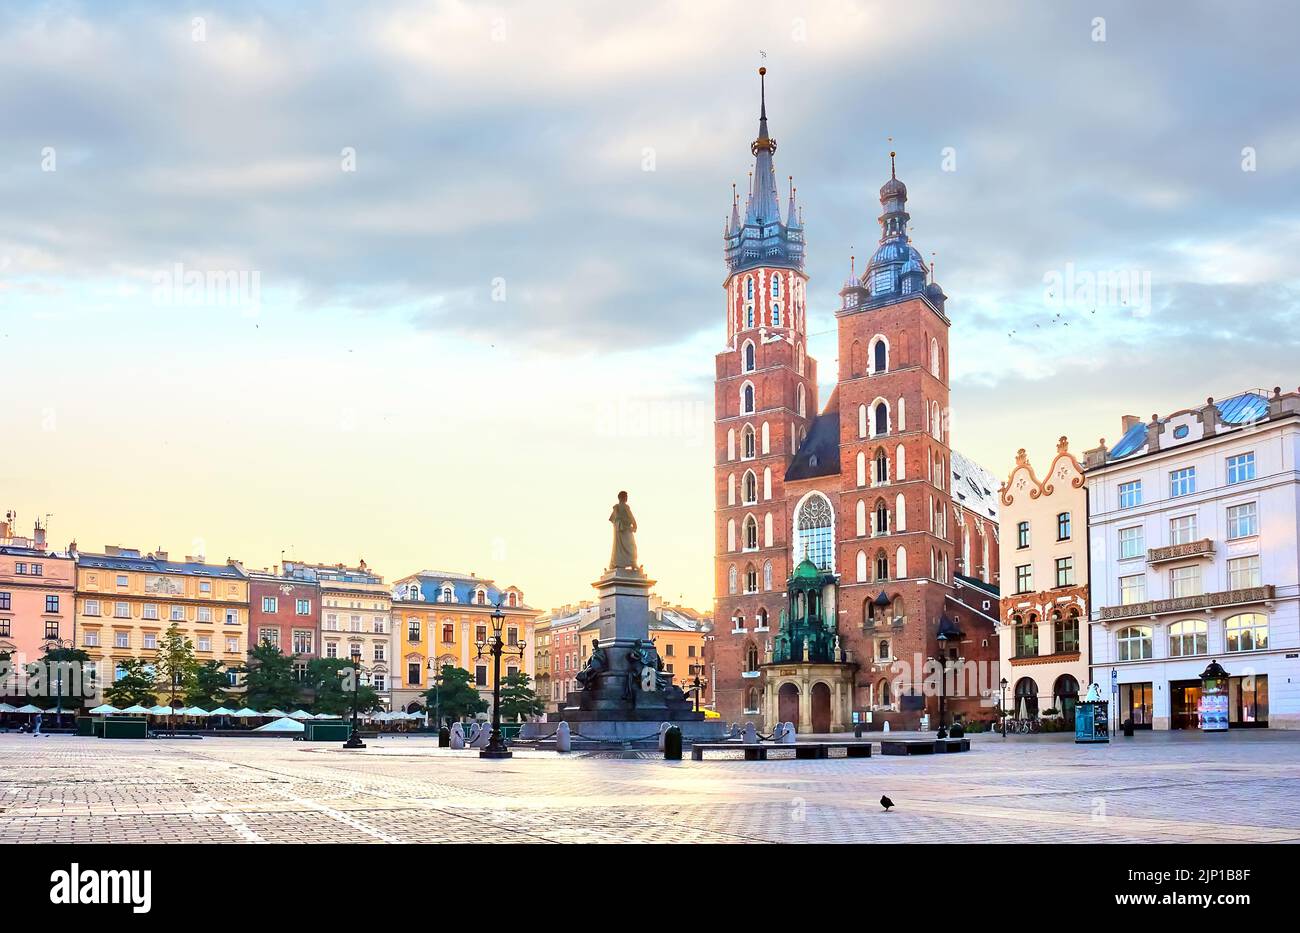 Mariacki Cathedral at Market square in Krakow at the center of old town at sunrise, Poland Stock Photo